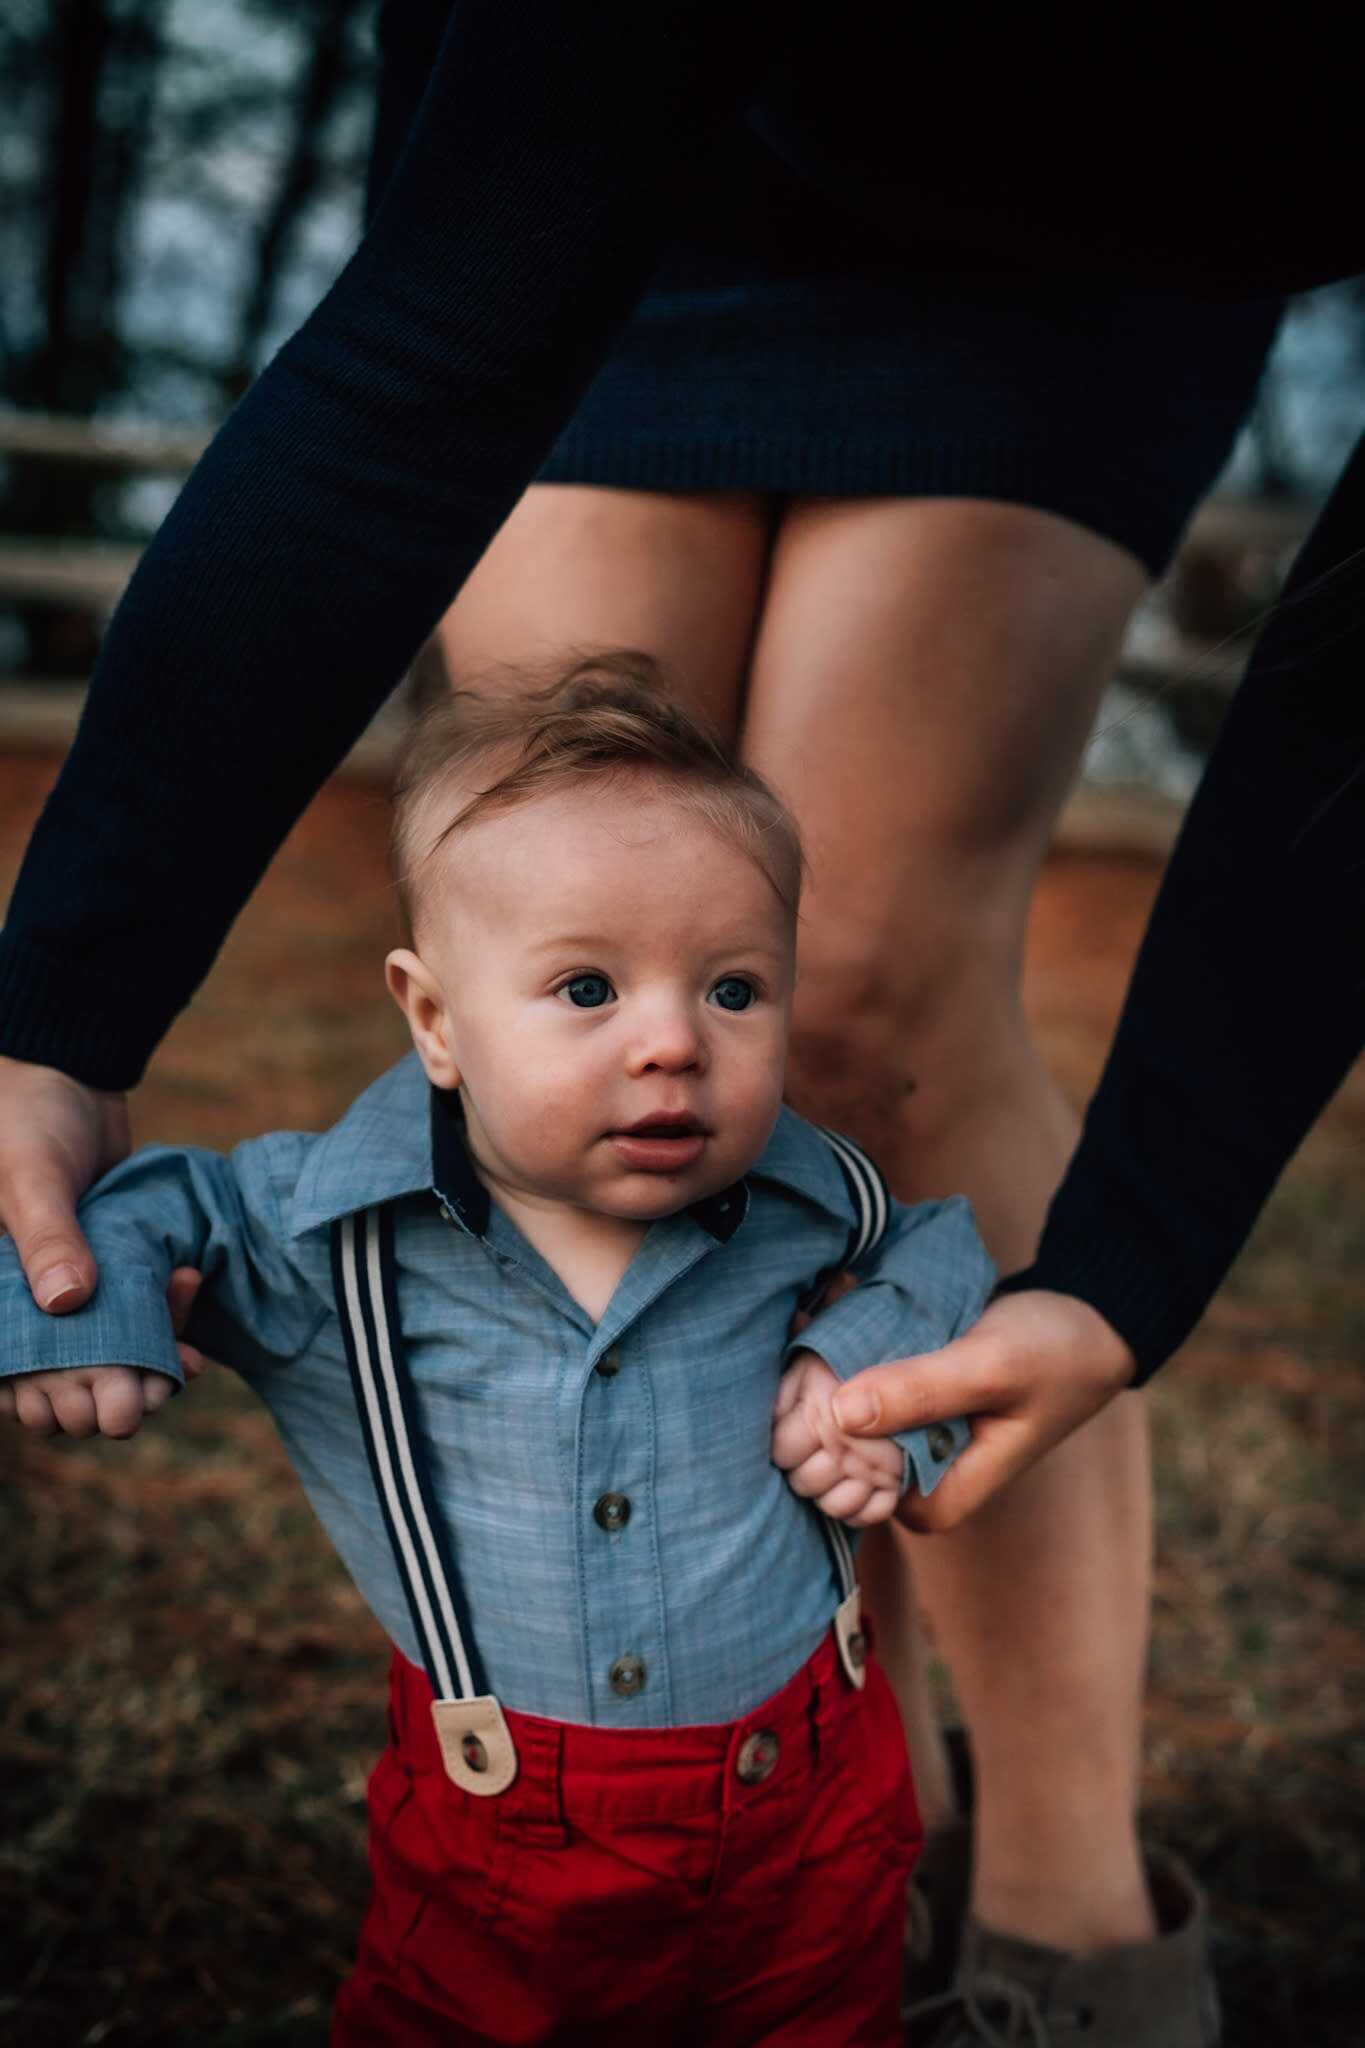 Hampton Roads family photographers capture little baby boy walking while wearing red pants, suspenders and a denim shirt as his mother holds his hands during their family photos